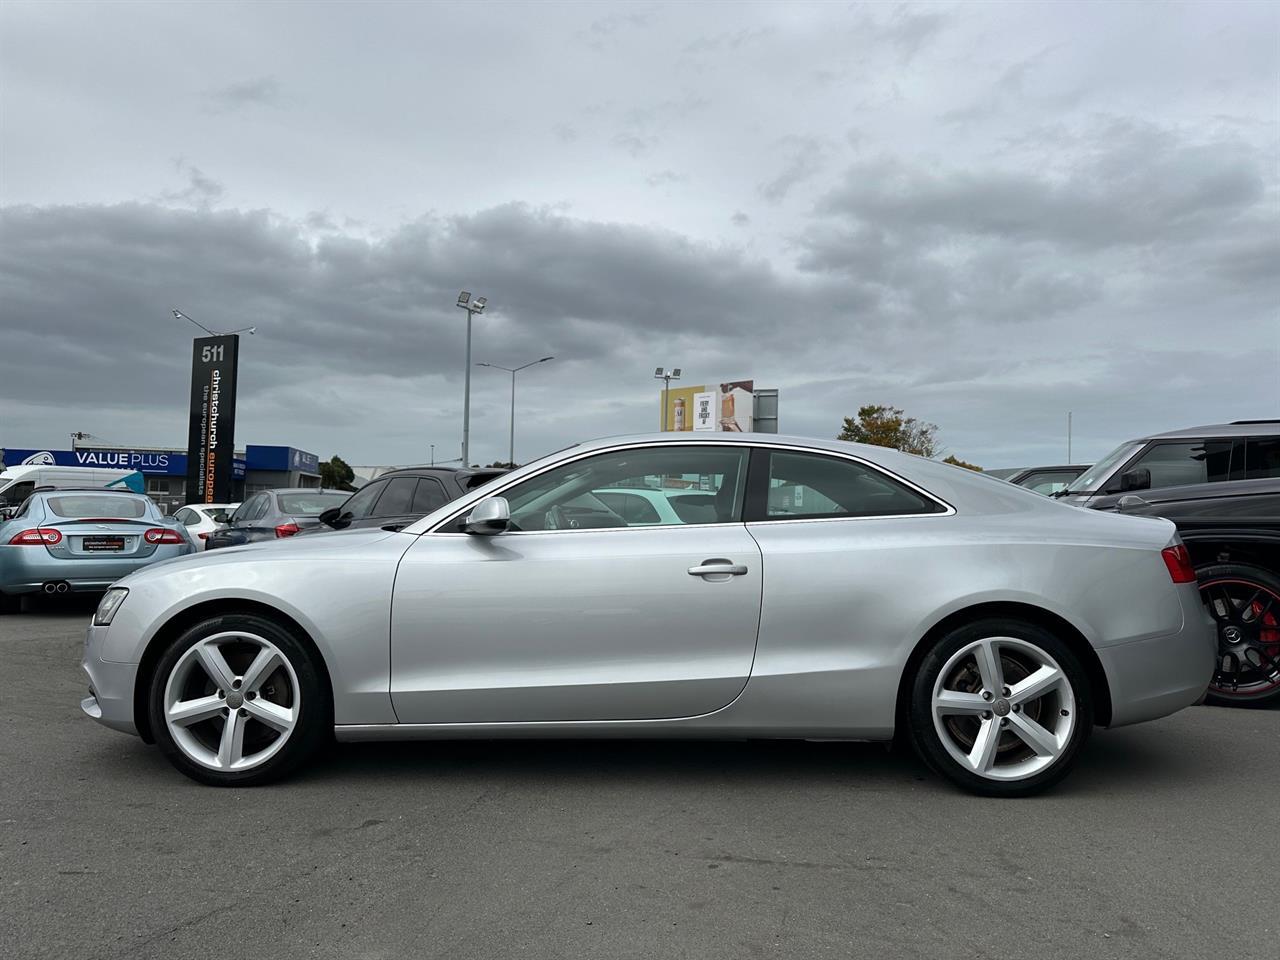 image-3, 2012 Audi A5 2.0 TFSI Quattro Facelift Coupe at Christchurch